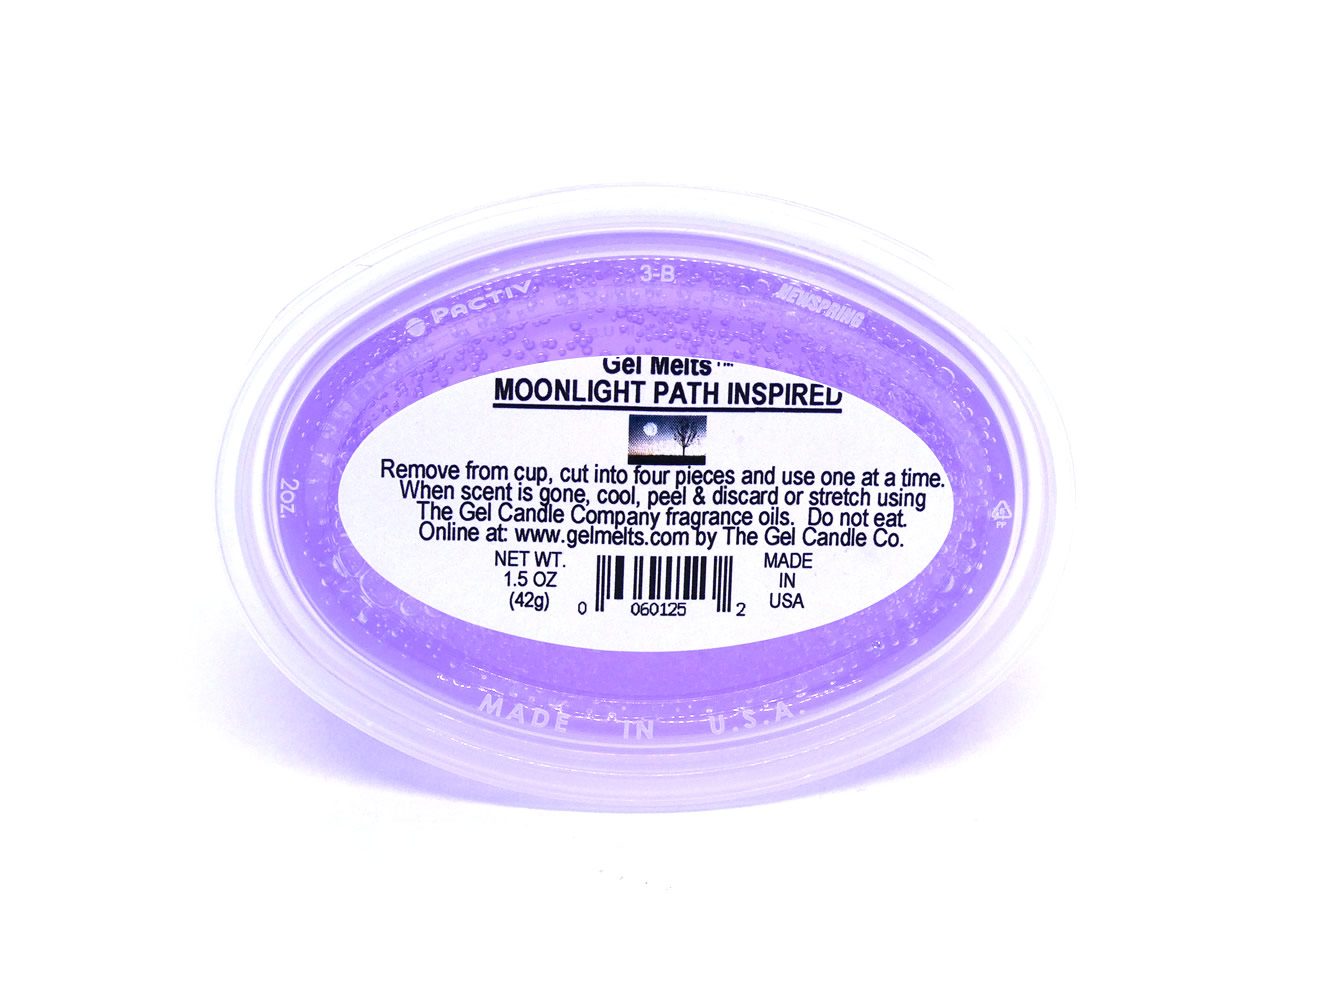 Moonlight Path Inspired Scented Gel Melts™ for warmer 3 pack